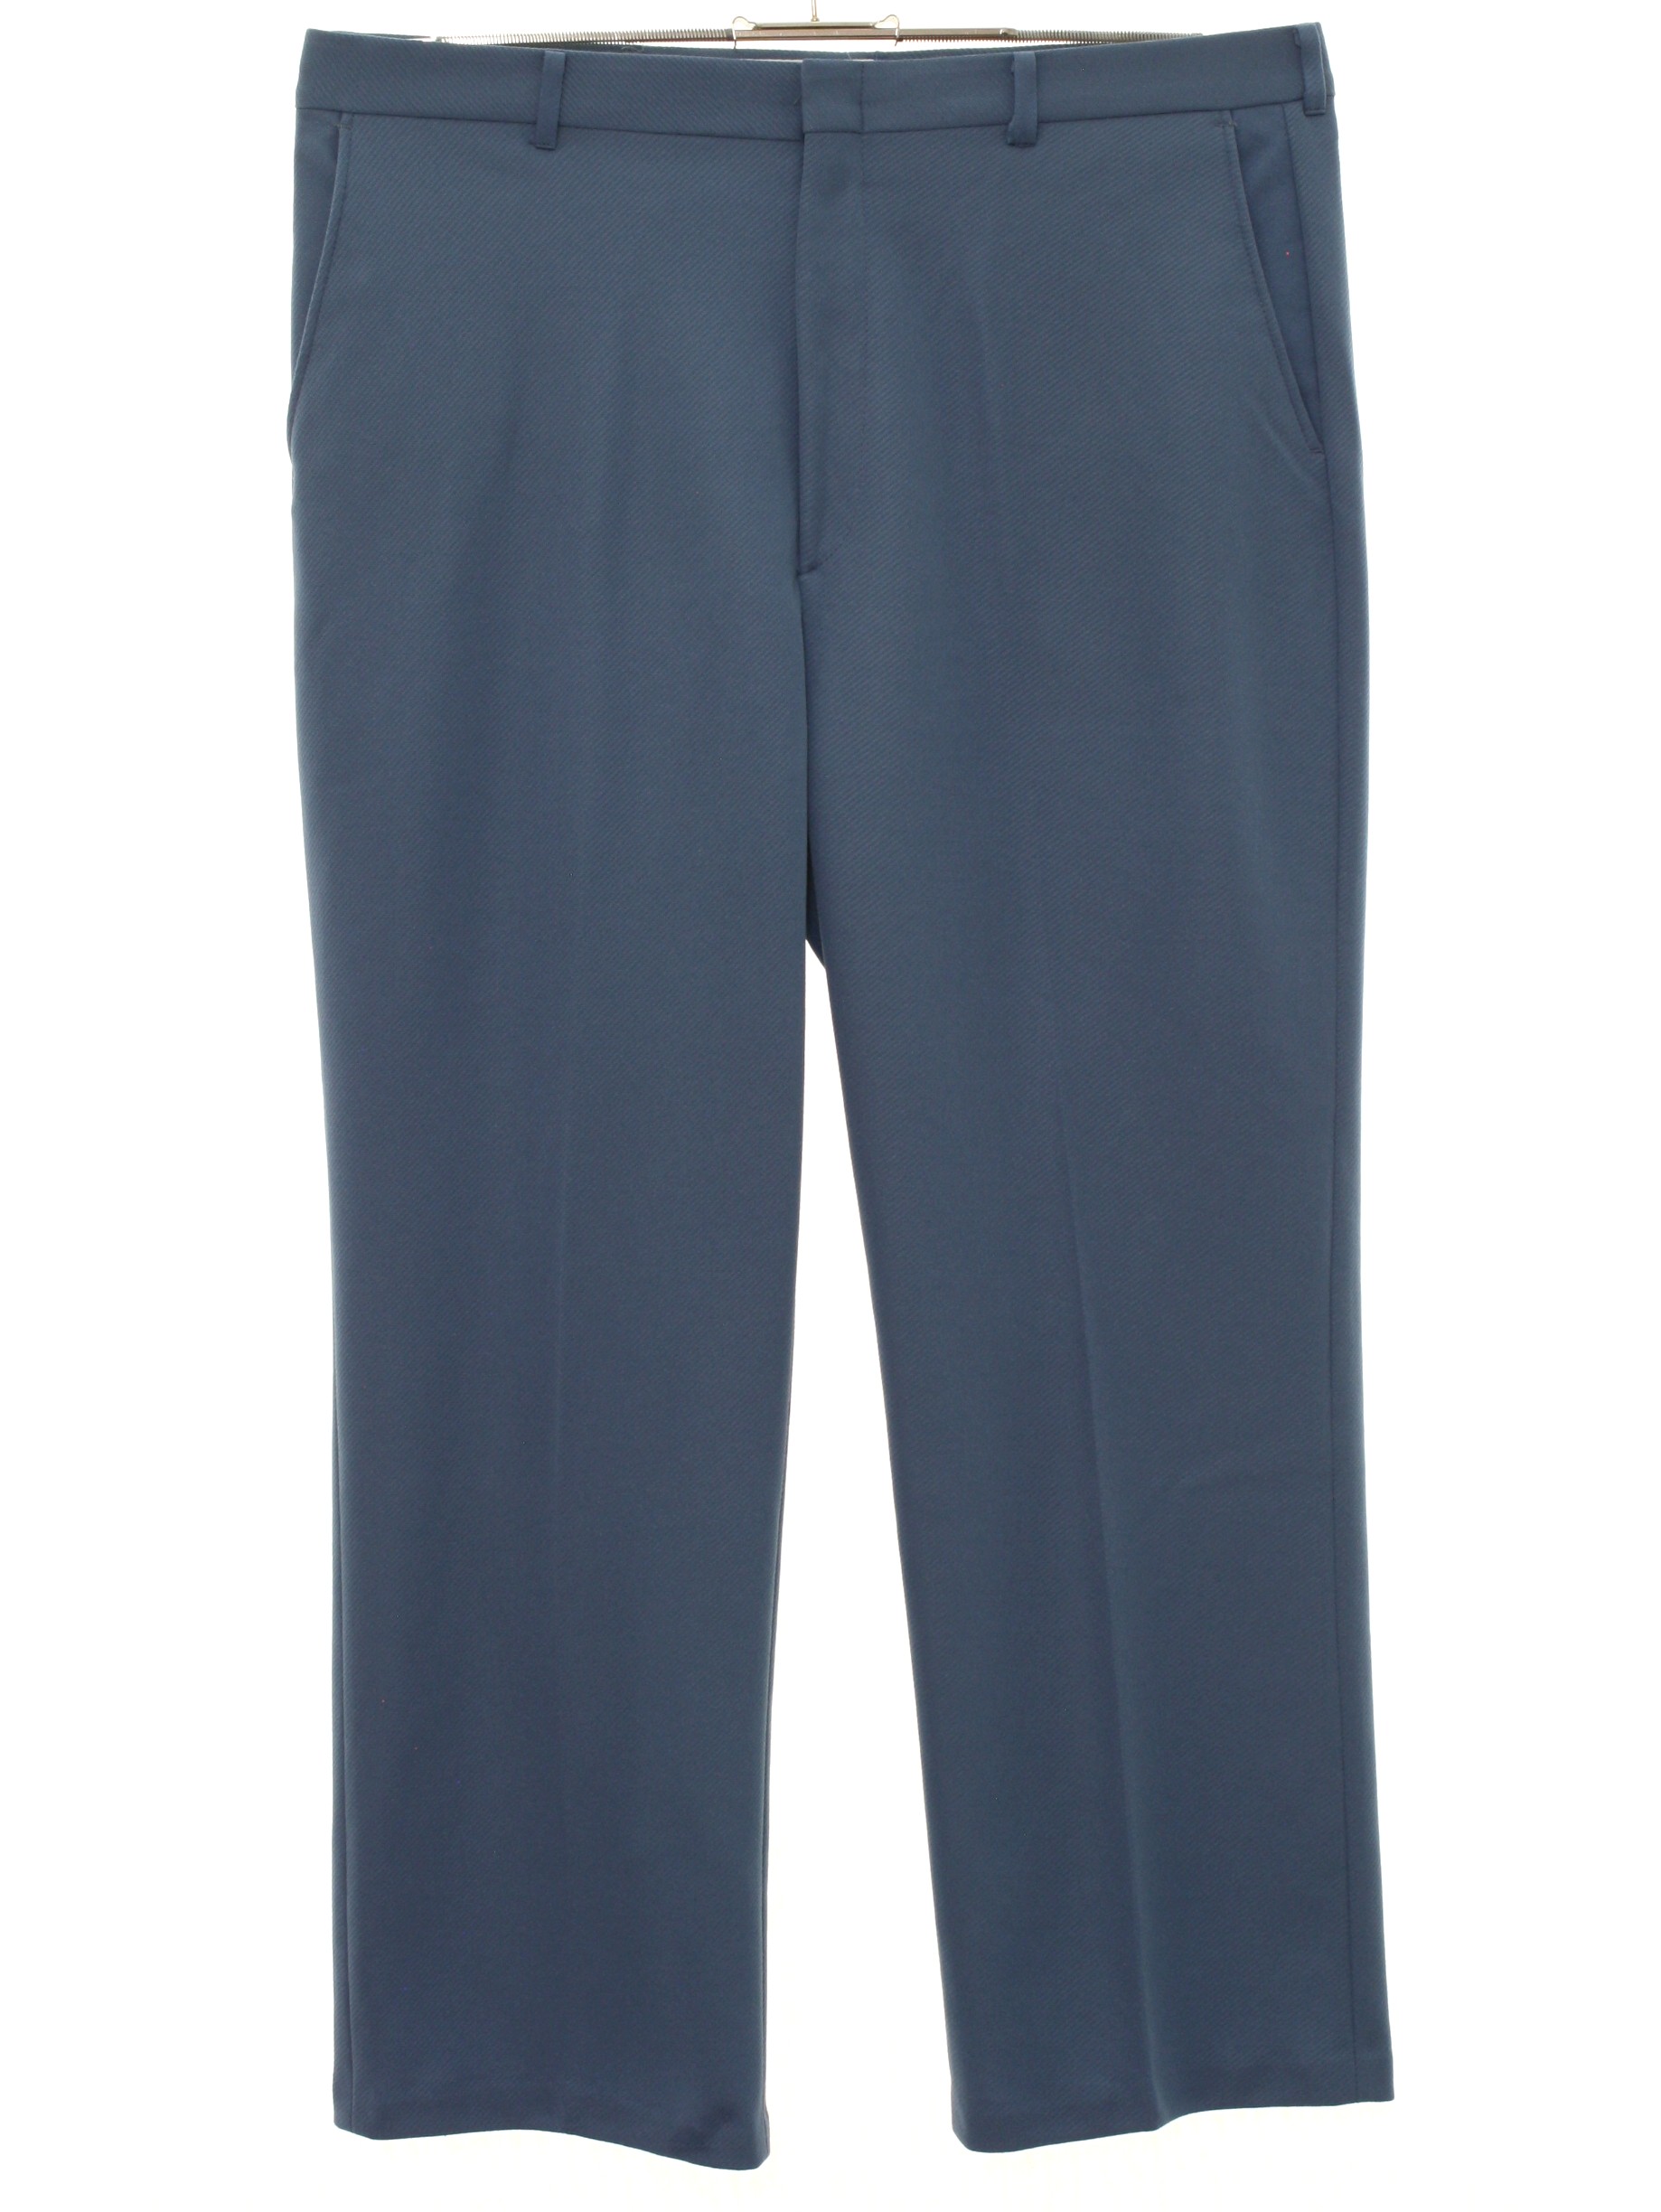 80s Retro Pants: 80s -Haband- Mens powder blue solid colored polyester ...